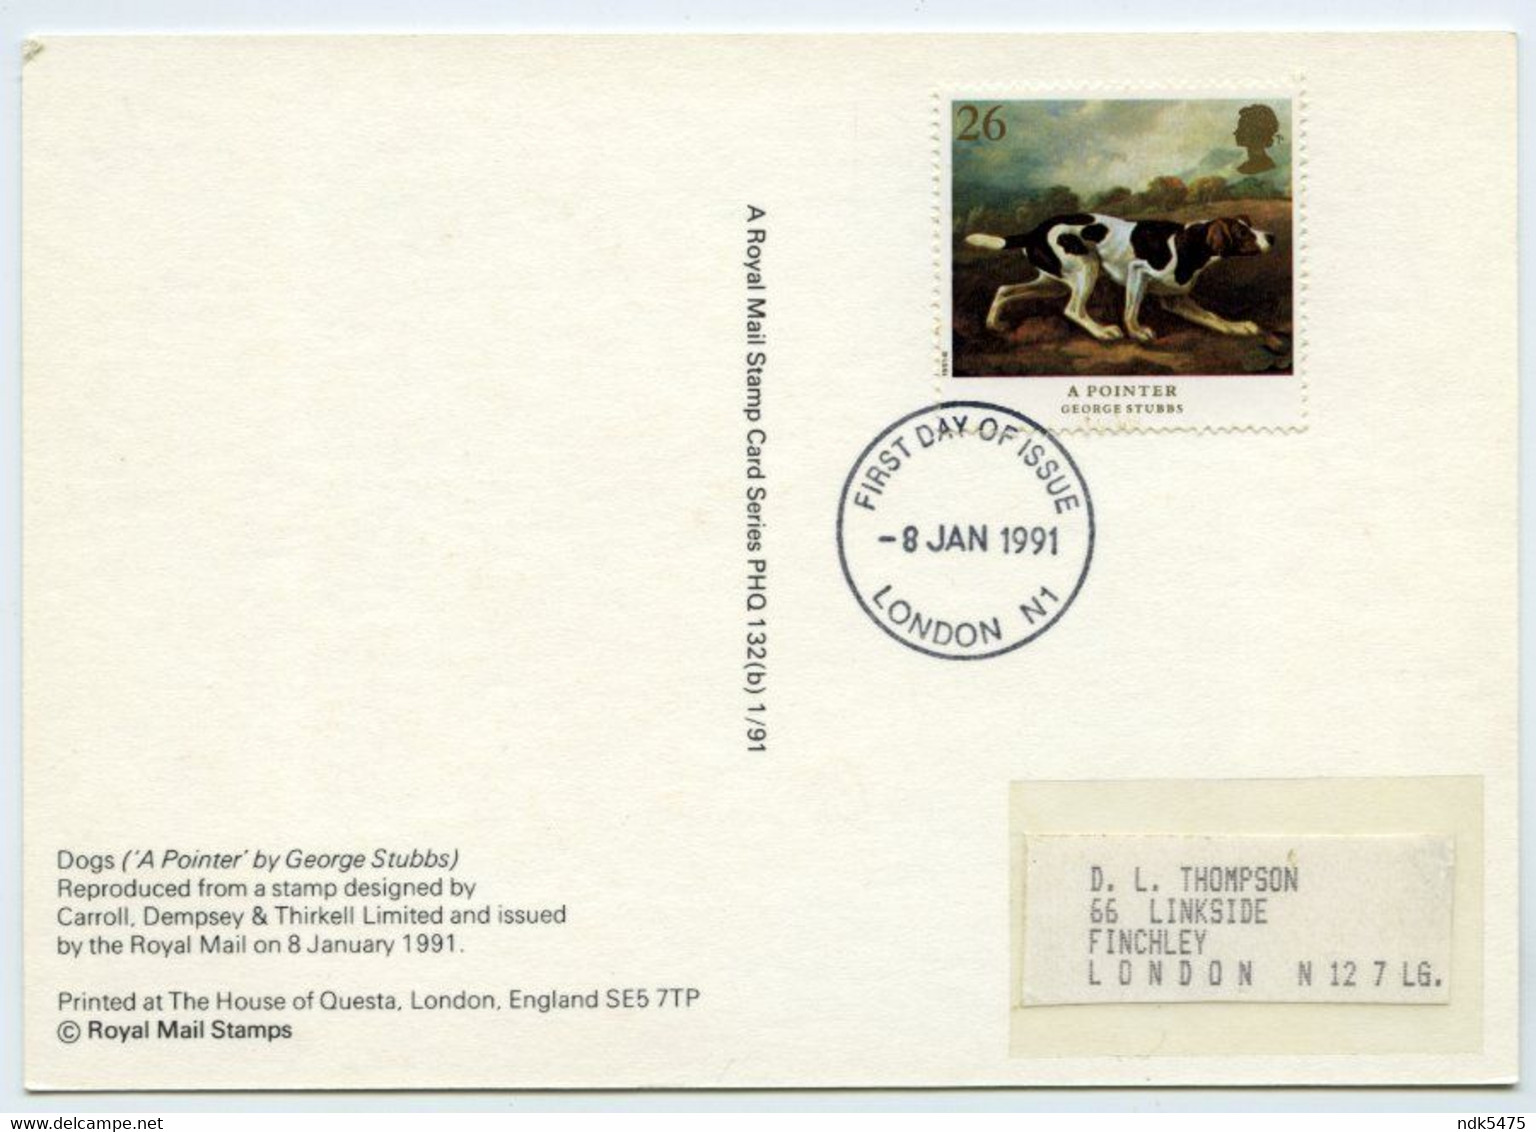 PHQ : GEORGE STUBBS - DOGS, A POINTER, 1991 : FIRST DAY OF ISSUE, LONDON N1, FINCHLEY (10 X 15cms Approx.) - Cartes PHQ